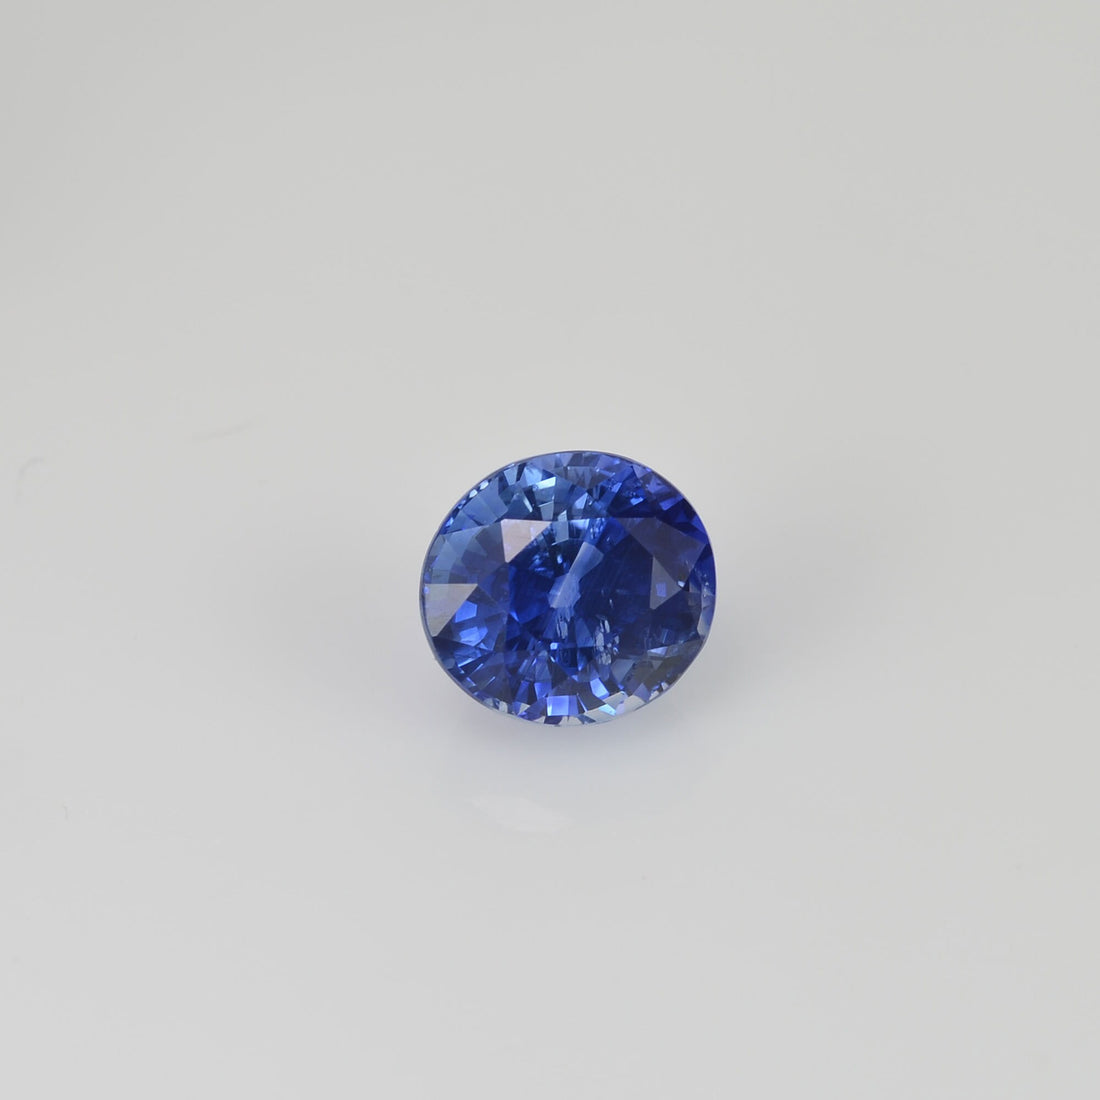 1.97 cts Natural Blue Sapphire Loose Gemstone Oval Cut